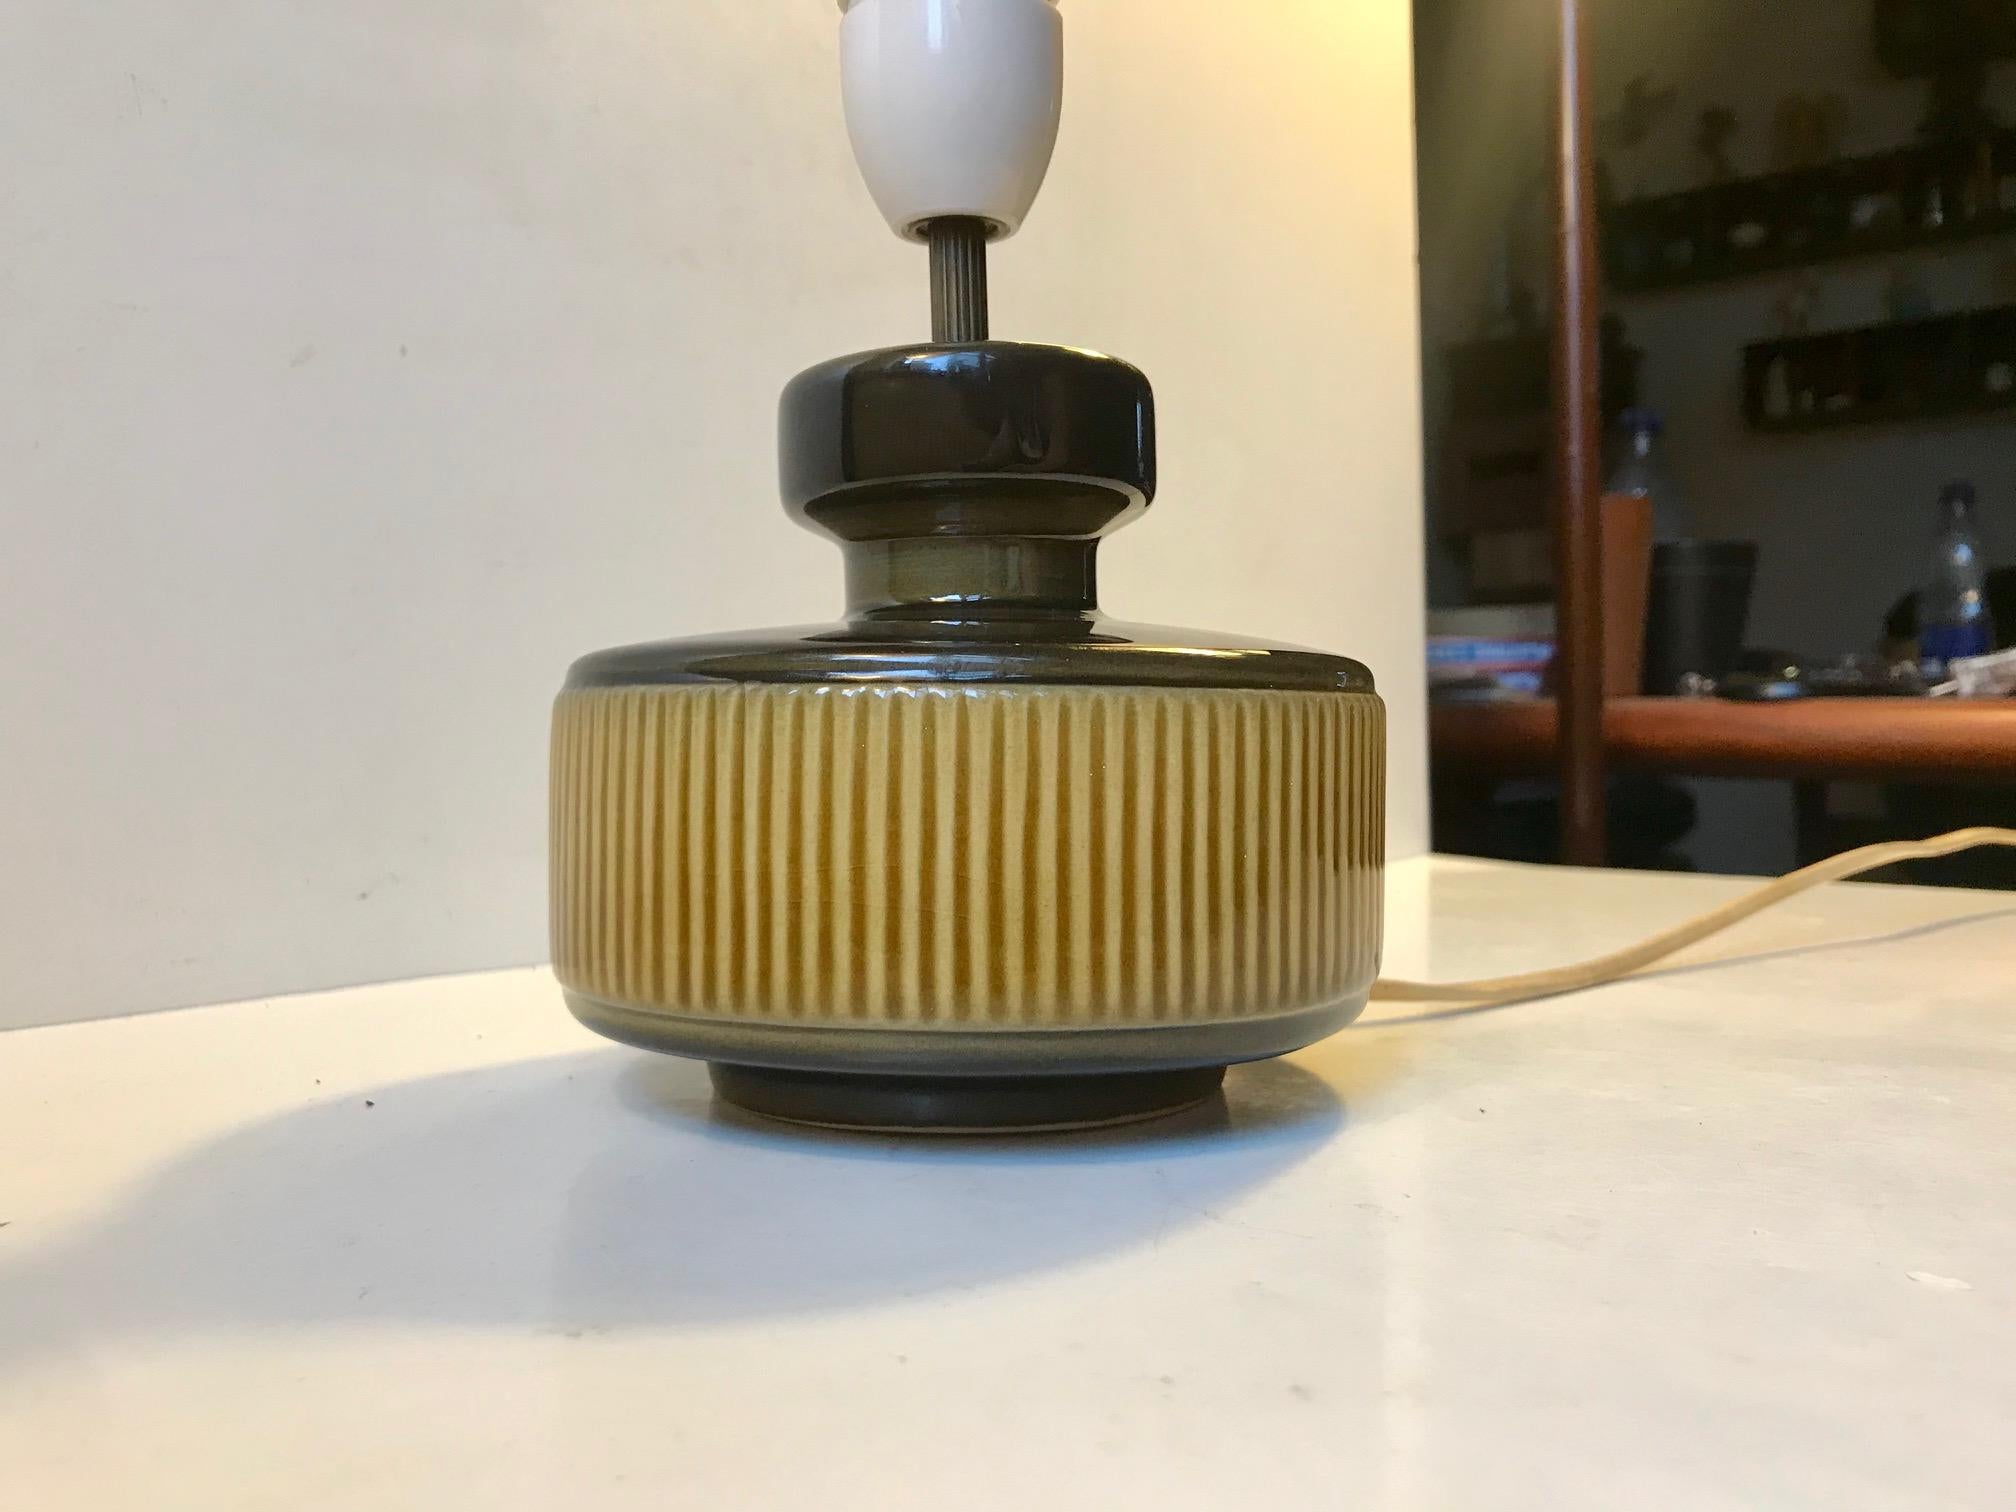 Small Danish pottery table lamp with pickles green glaze and a center decor in yellow stripes. This particular one was manufactured by Søholm in Denmark during the 1970s. Please notice that this light comes without the shade. Please personalize with